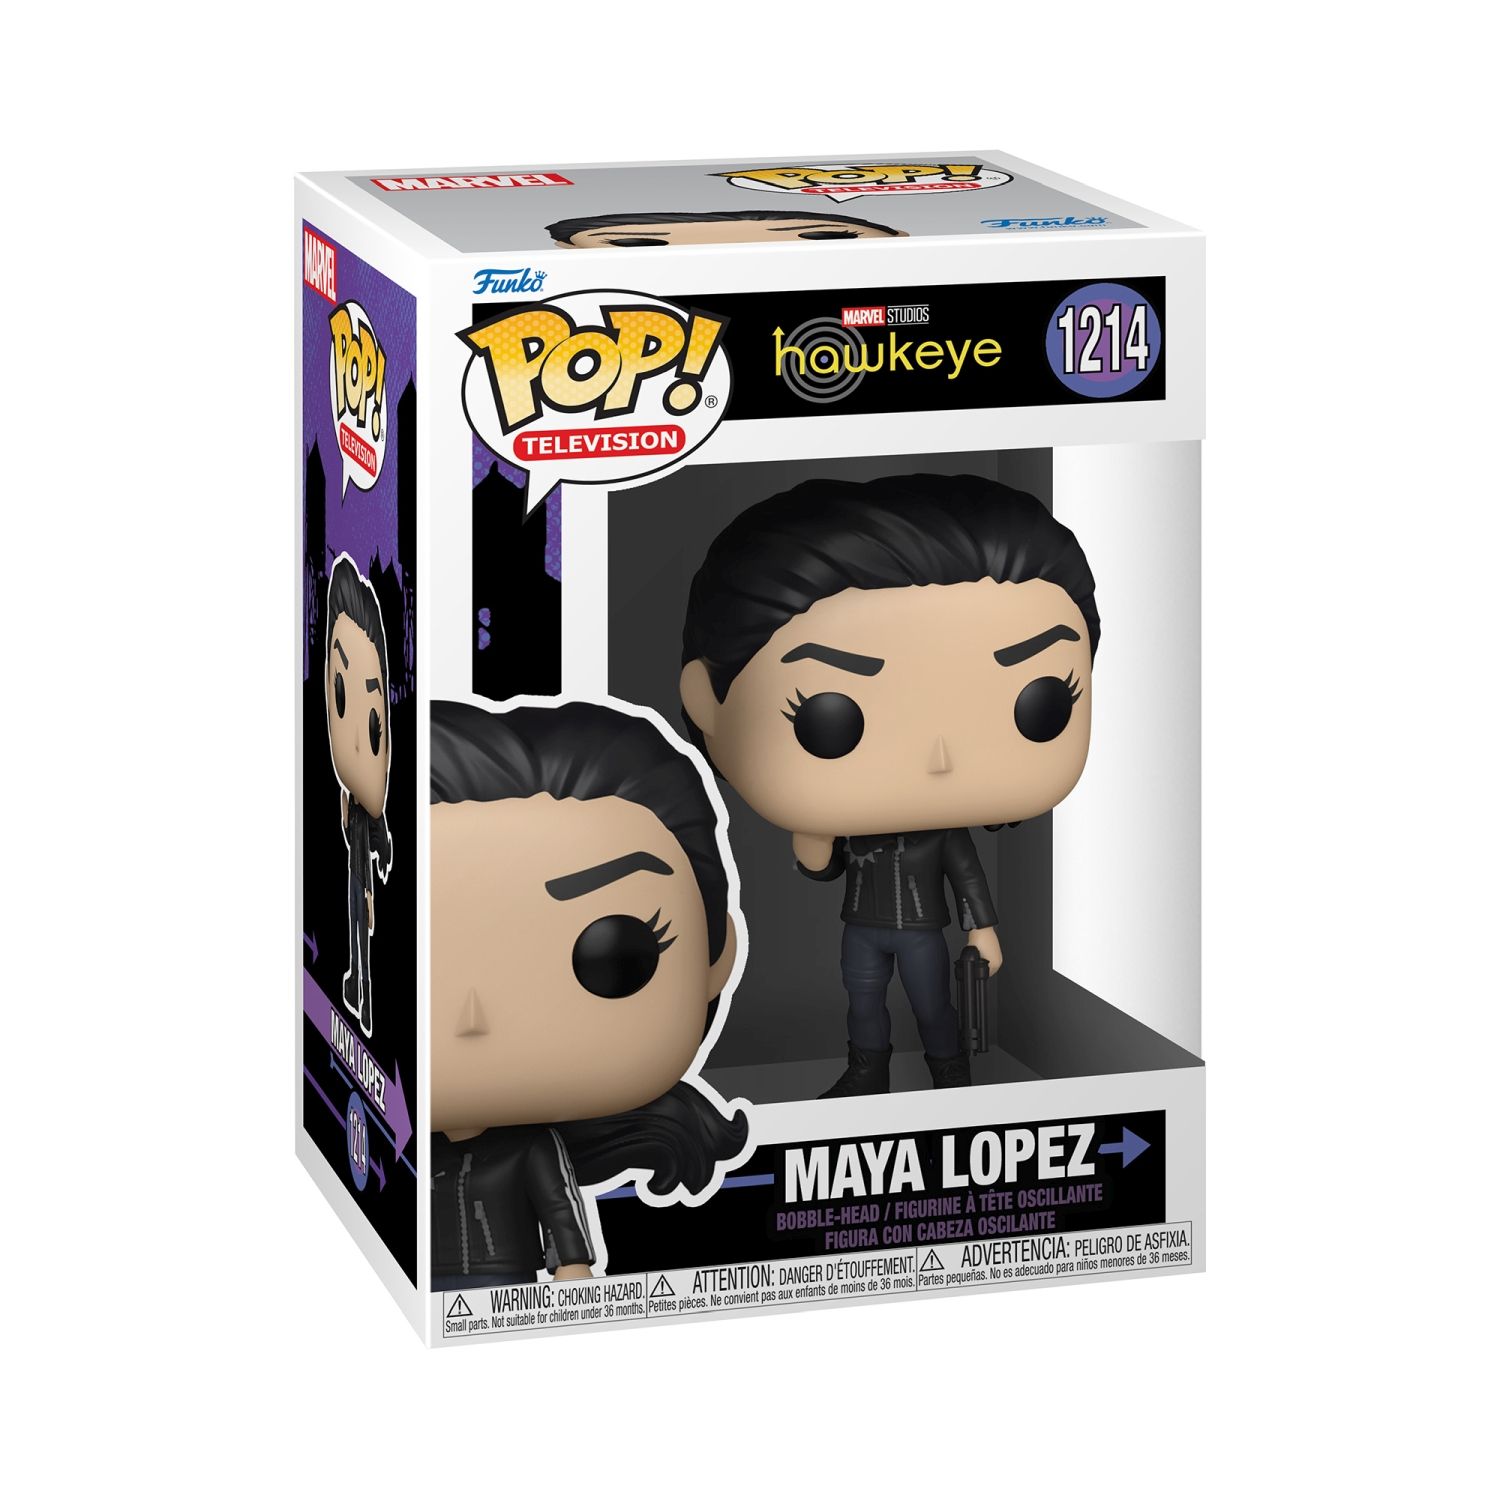 Funko POP Marvel Television Collectible featuring Maya Lopez from Hawkeye